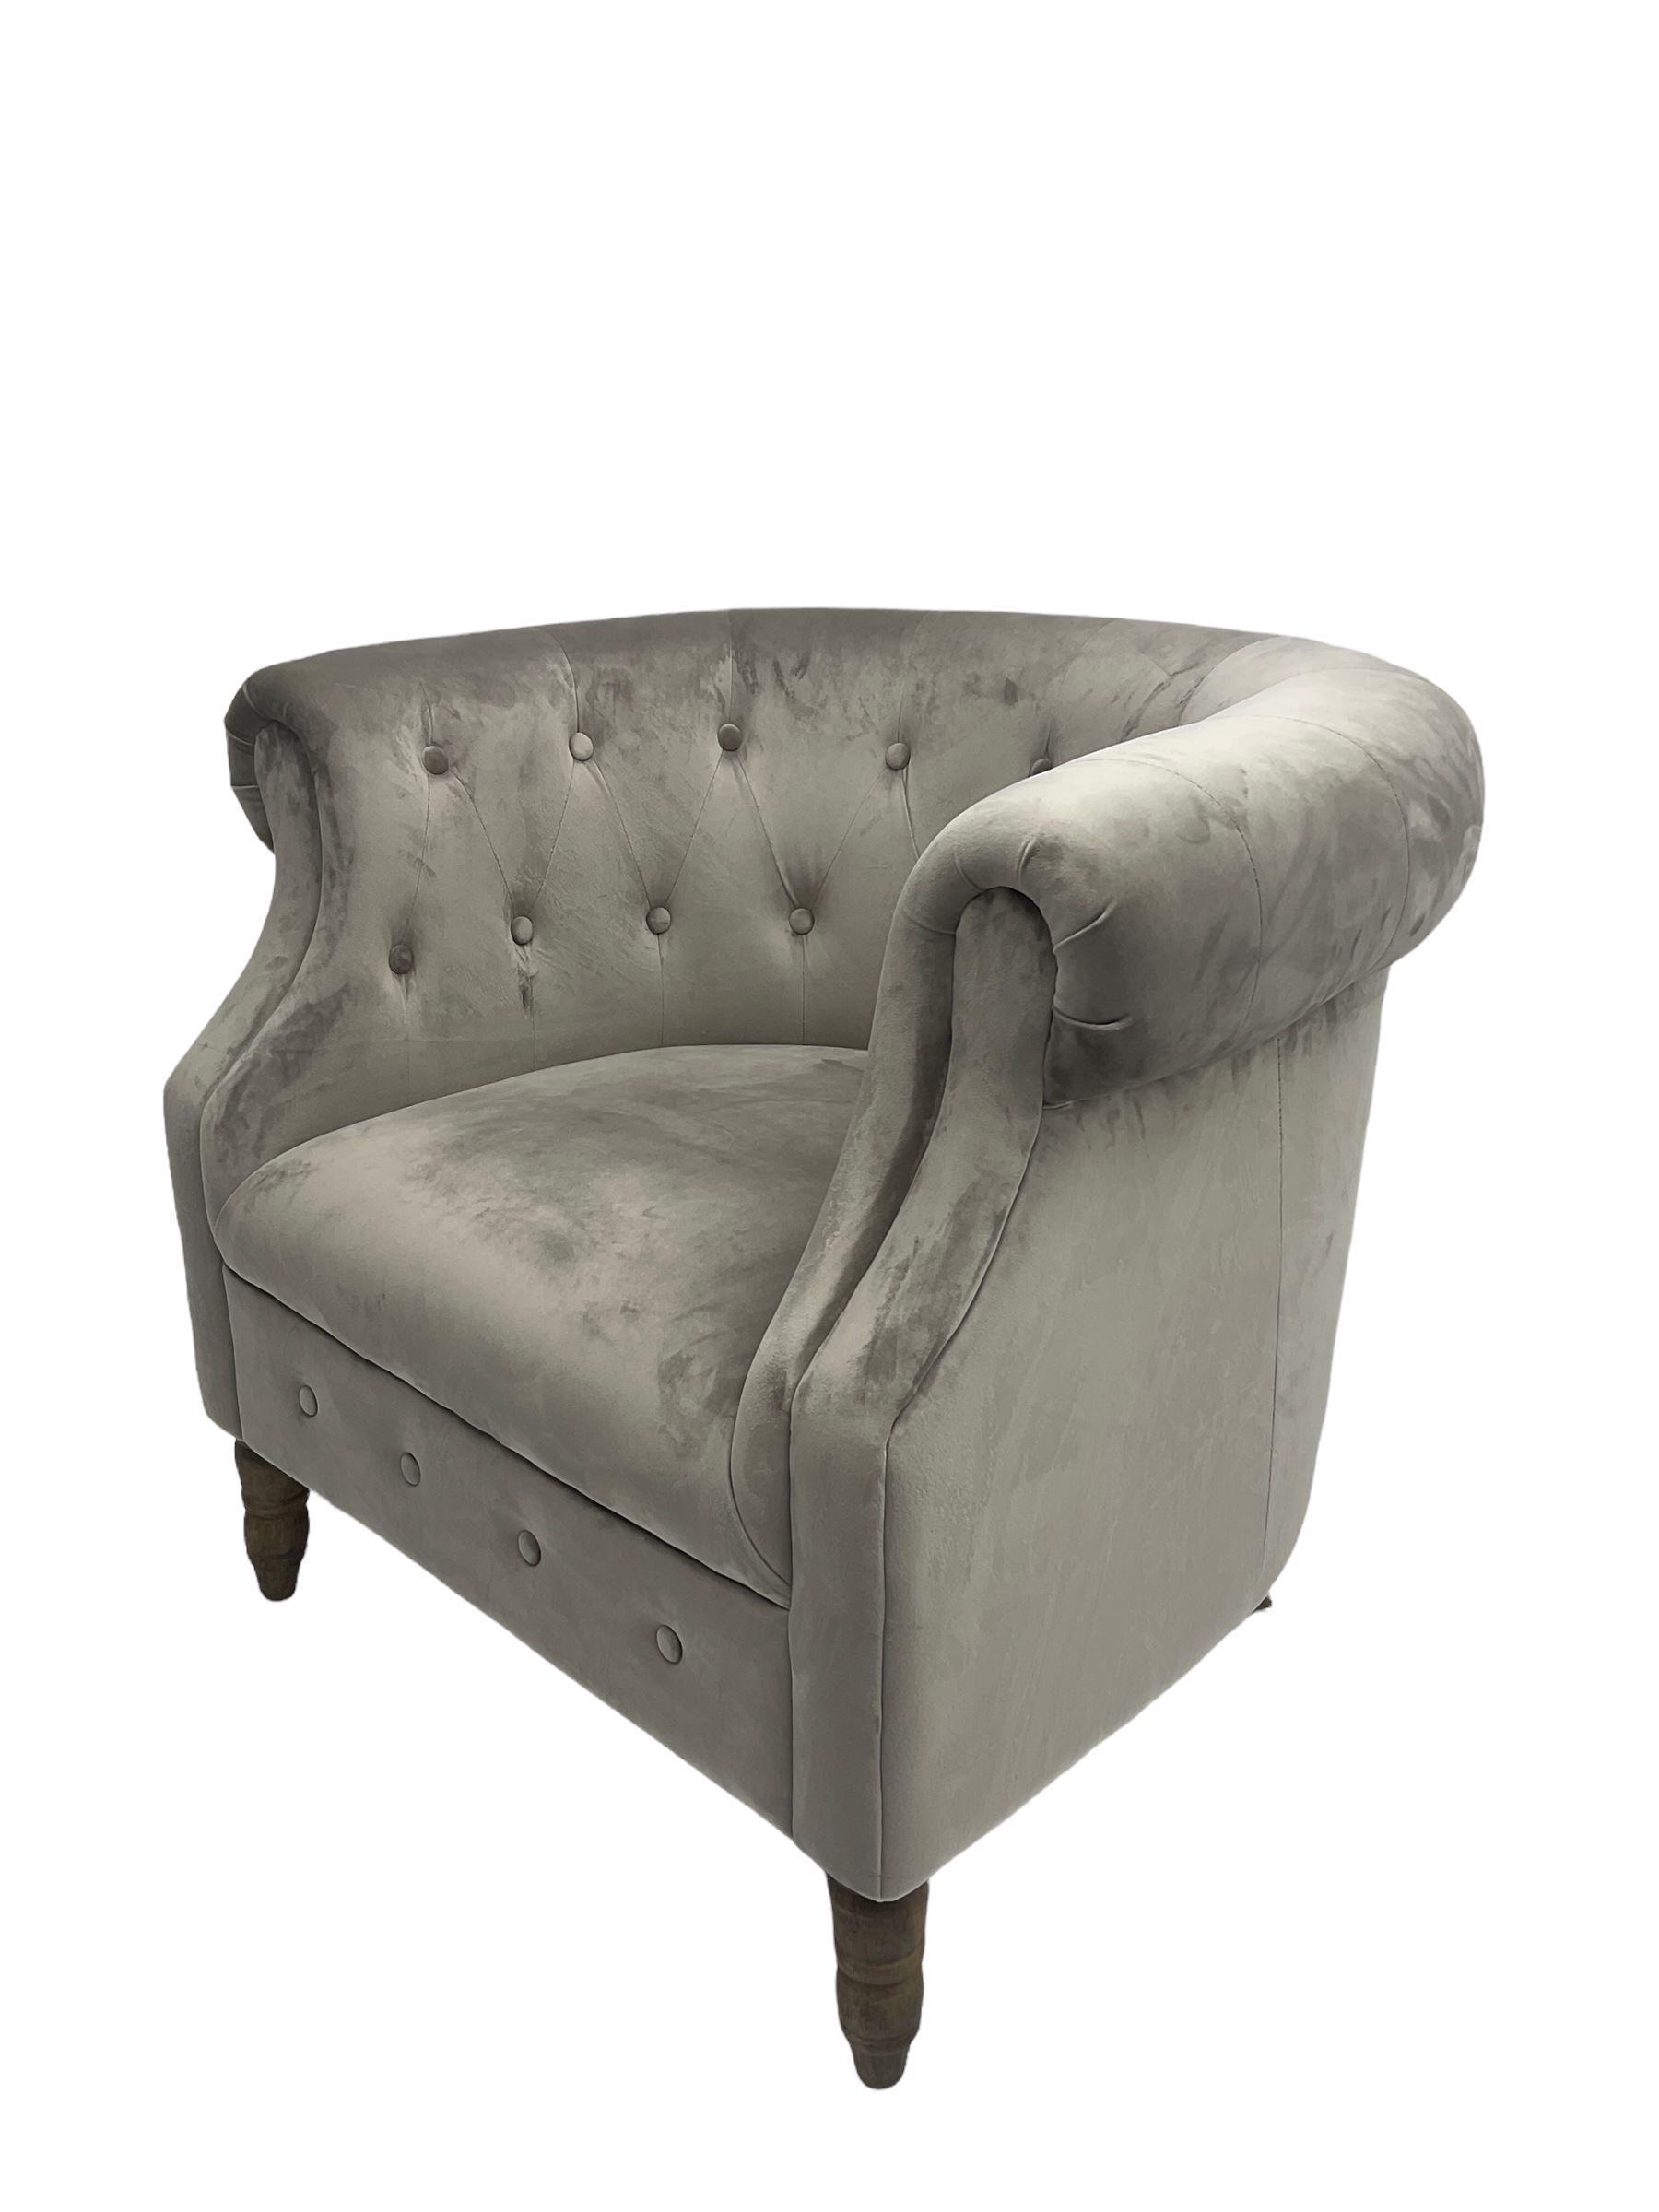 Grey velvet Chesterfield button pressed tub chair with rolled arms - Image 3 of 6